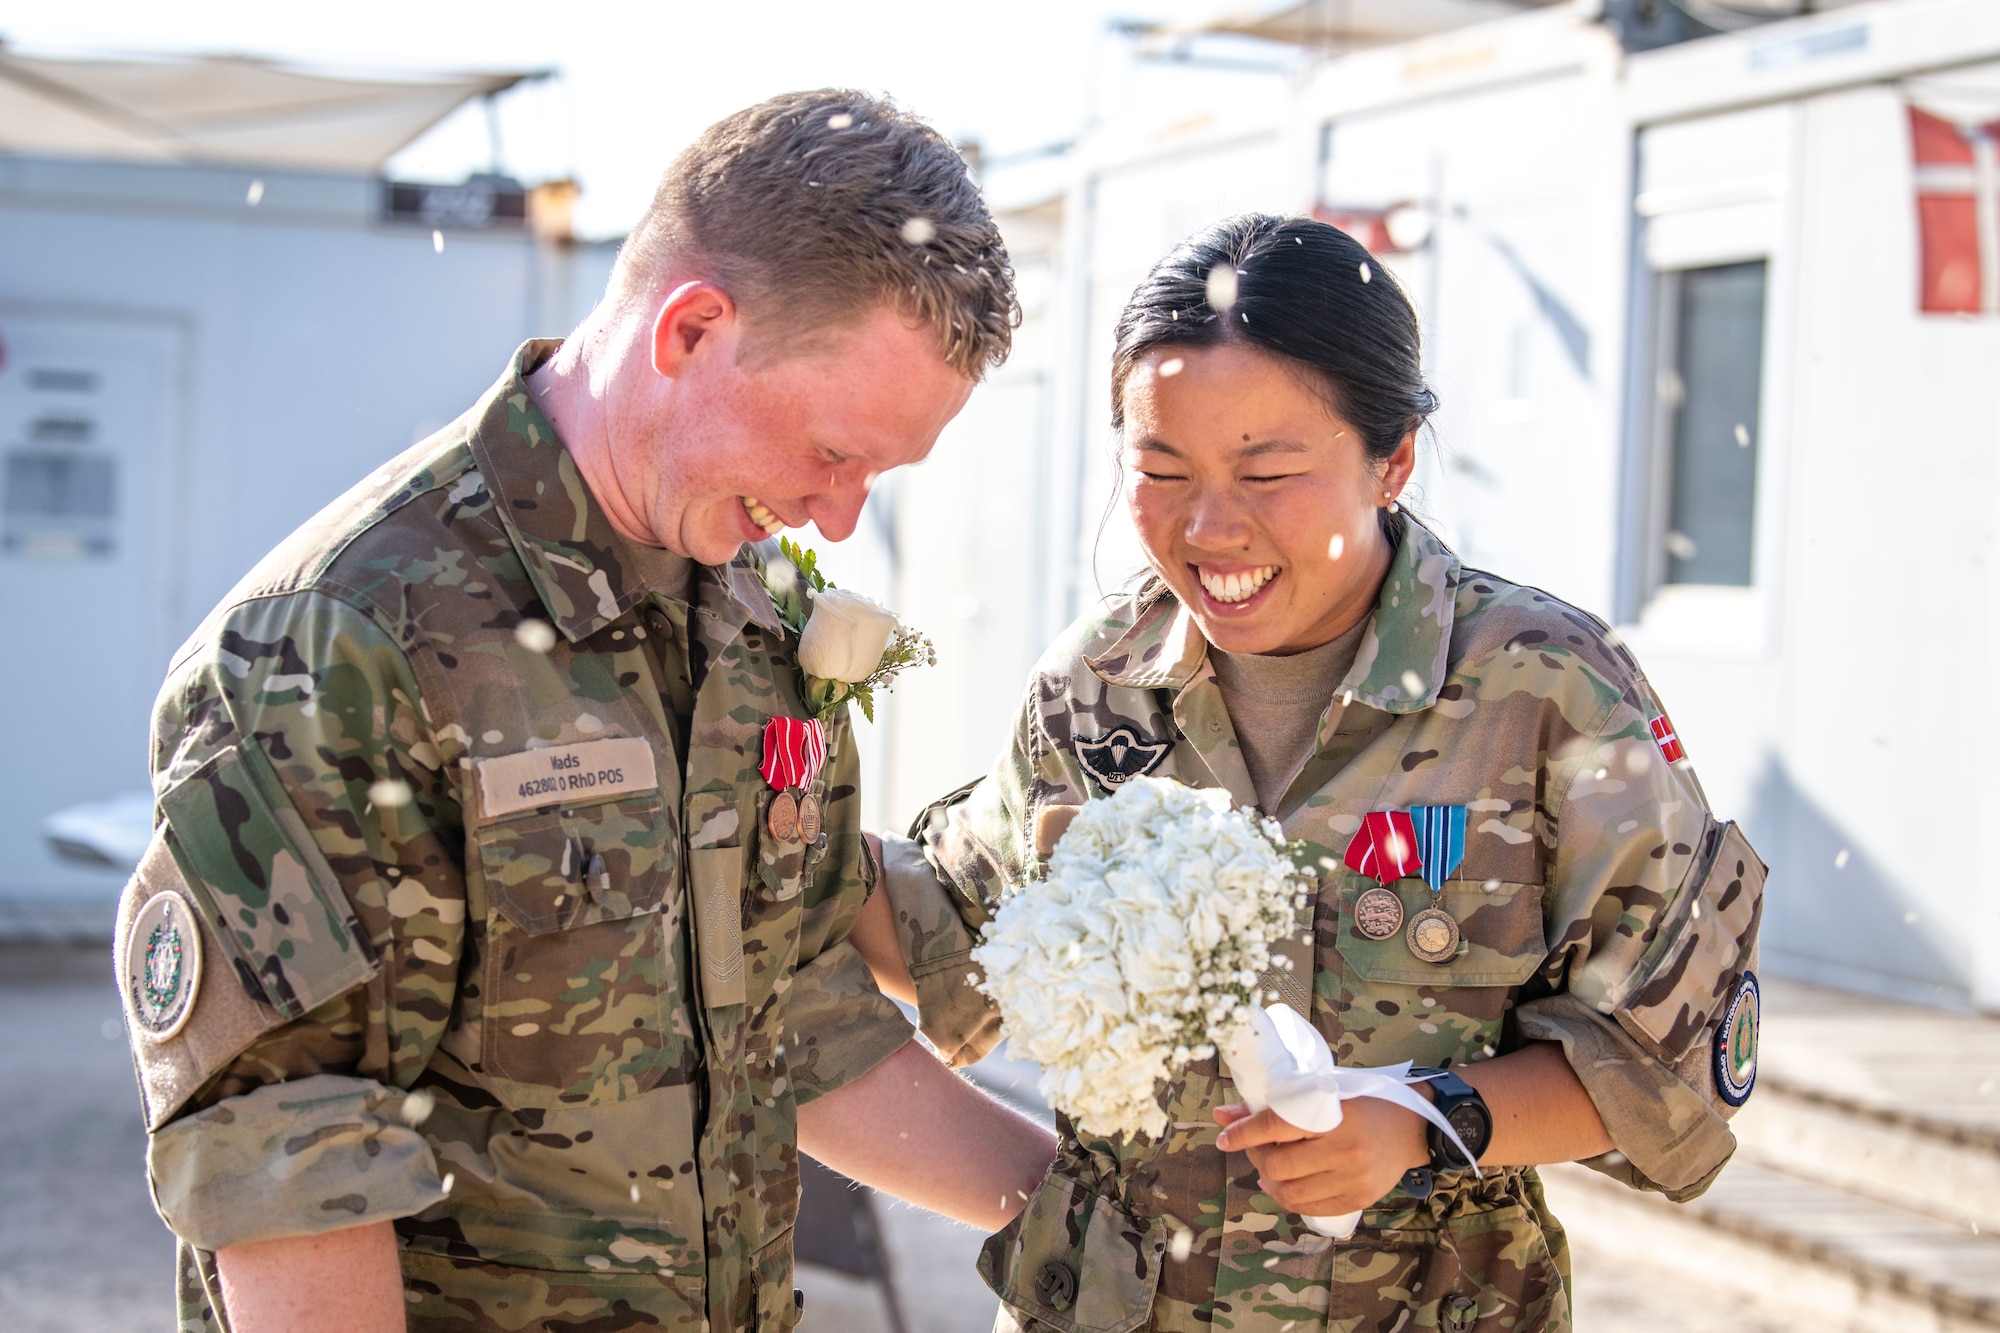 Sergeant 1st Class Mads Petersen, left, and Sergeant 1st Class Signe Li Jakobsen, right, Danish National Support Element quartermasters, are celebrated during their wedding at Ali Al Salem Air Base, Kuwait, May 3, 2023.